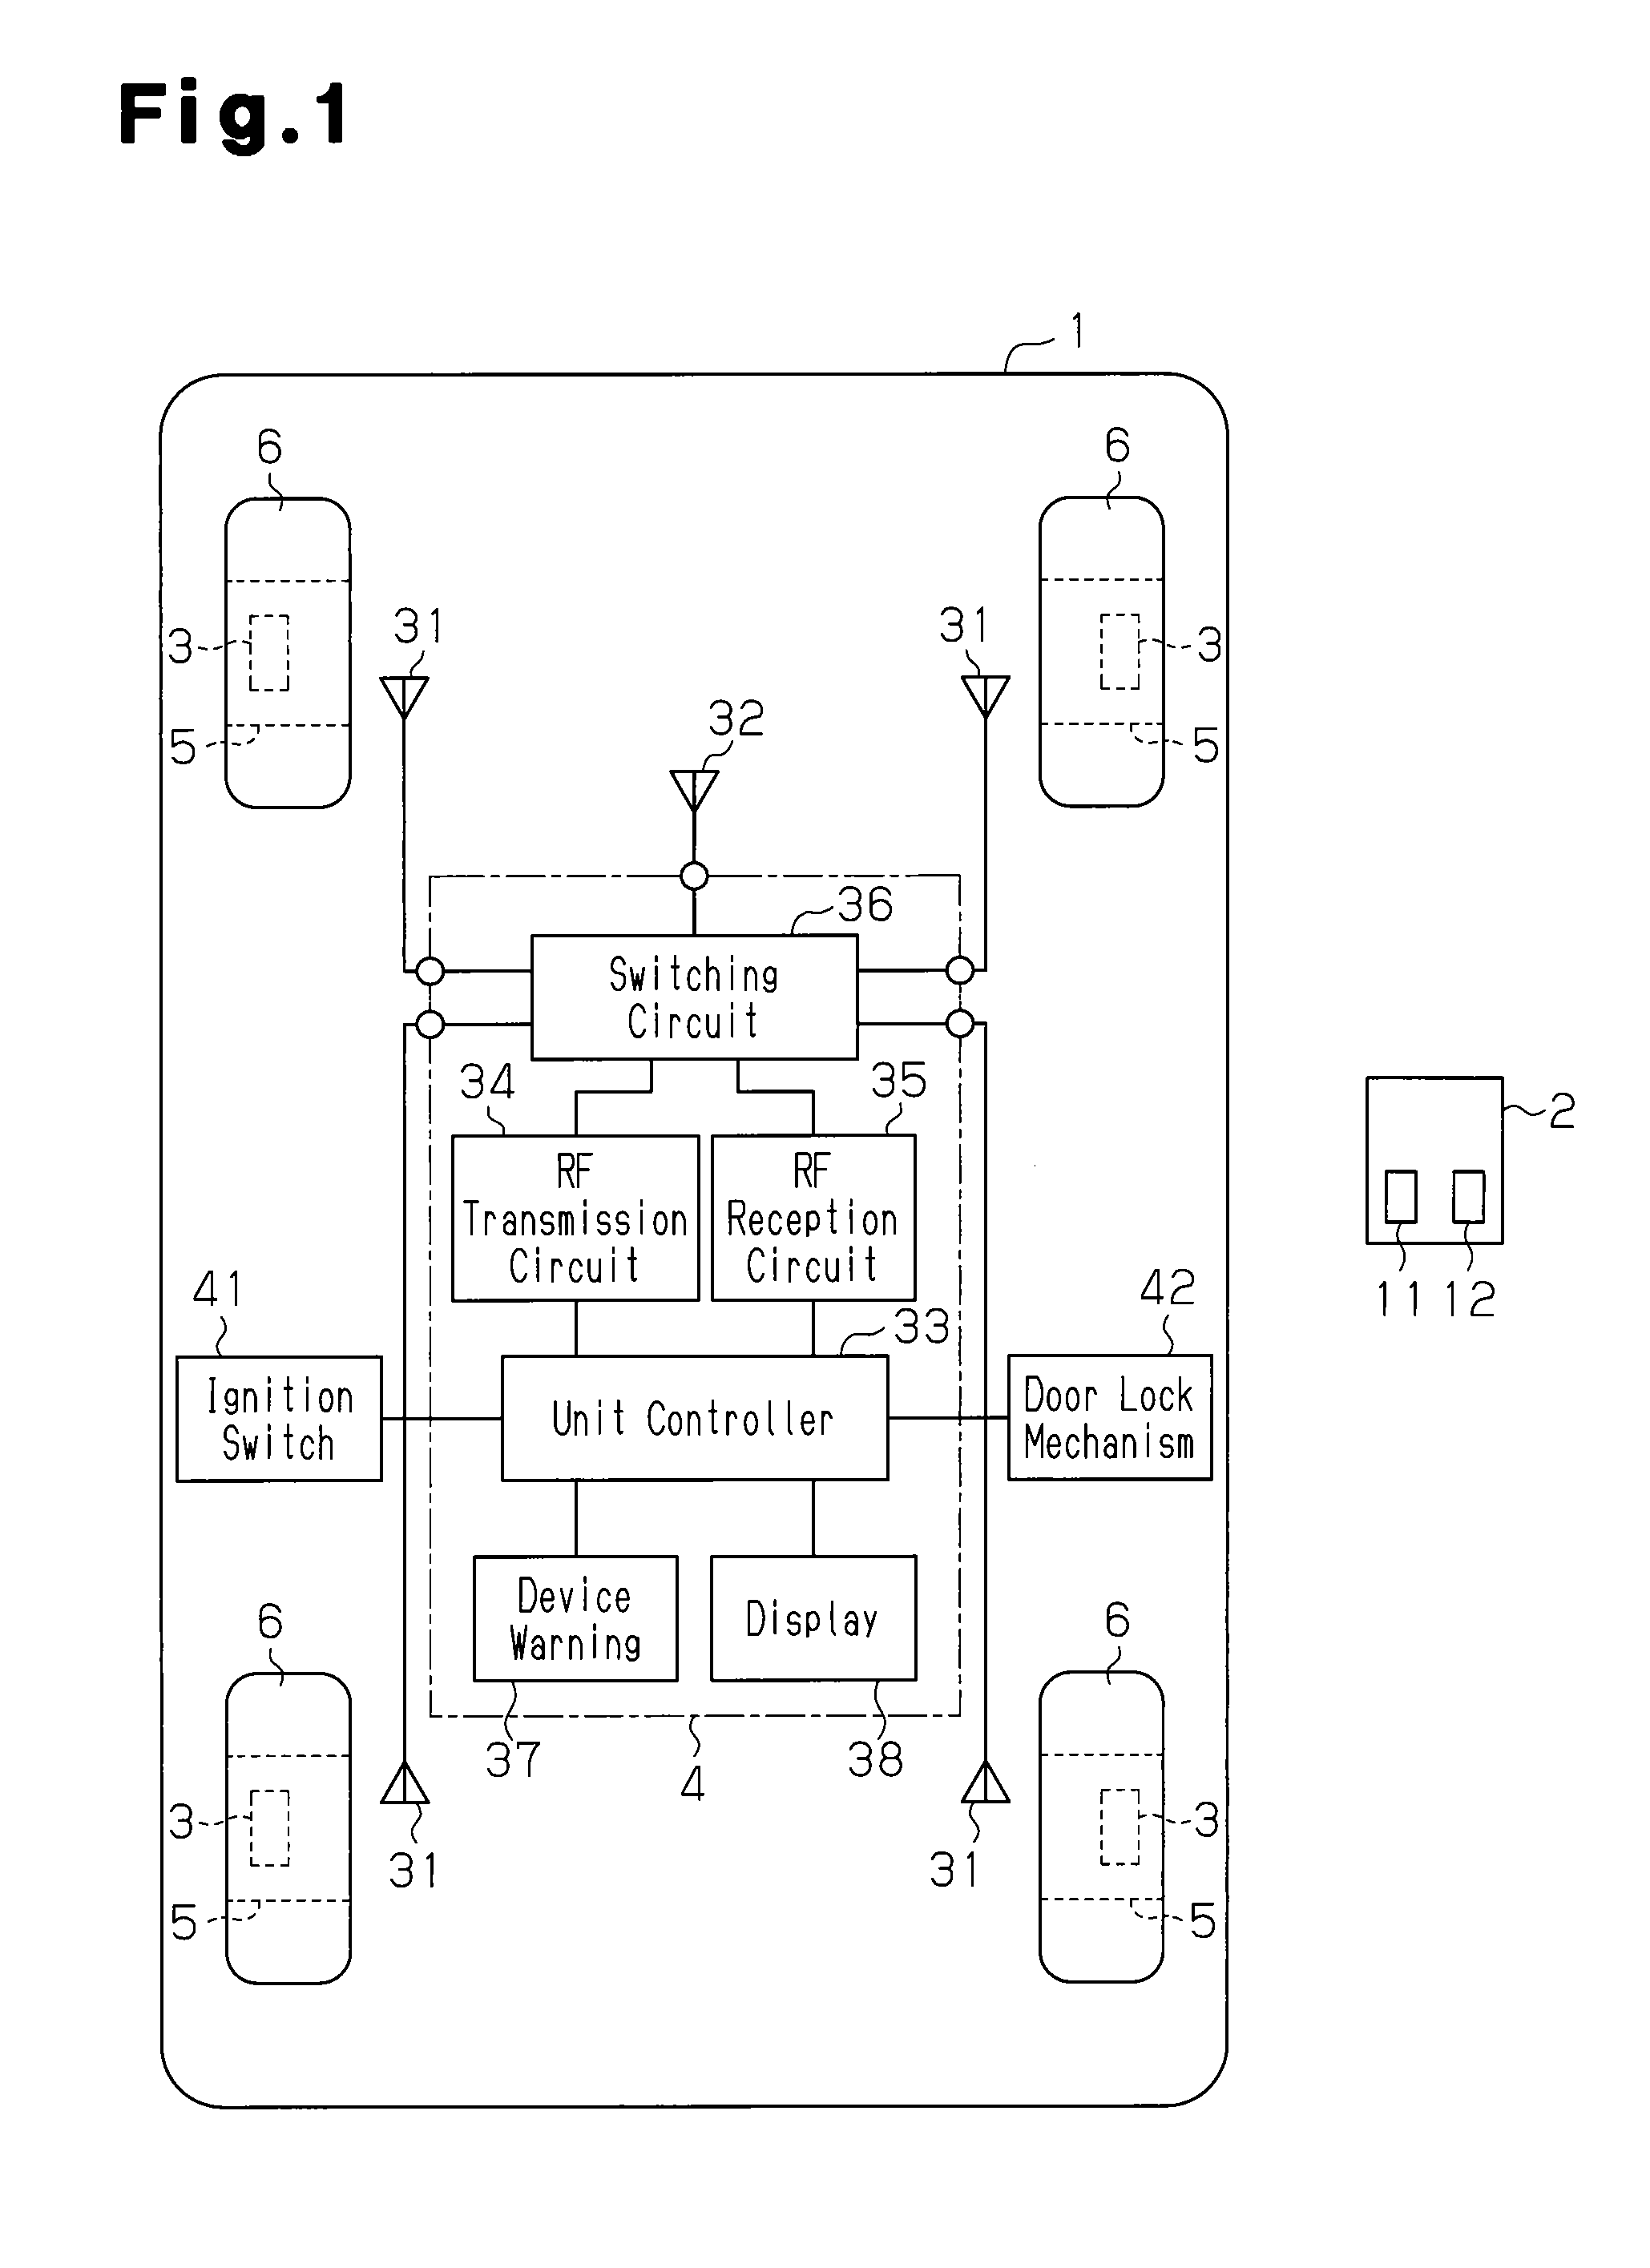 Tire condition monitoring apparatus with keyless entry function